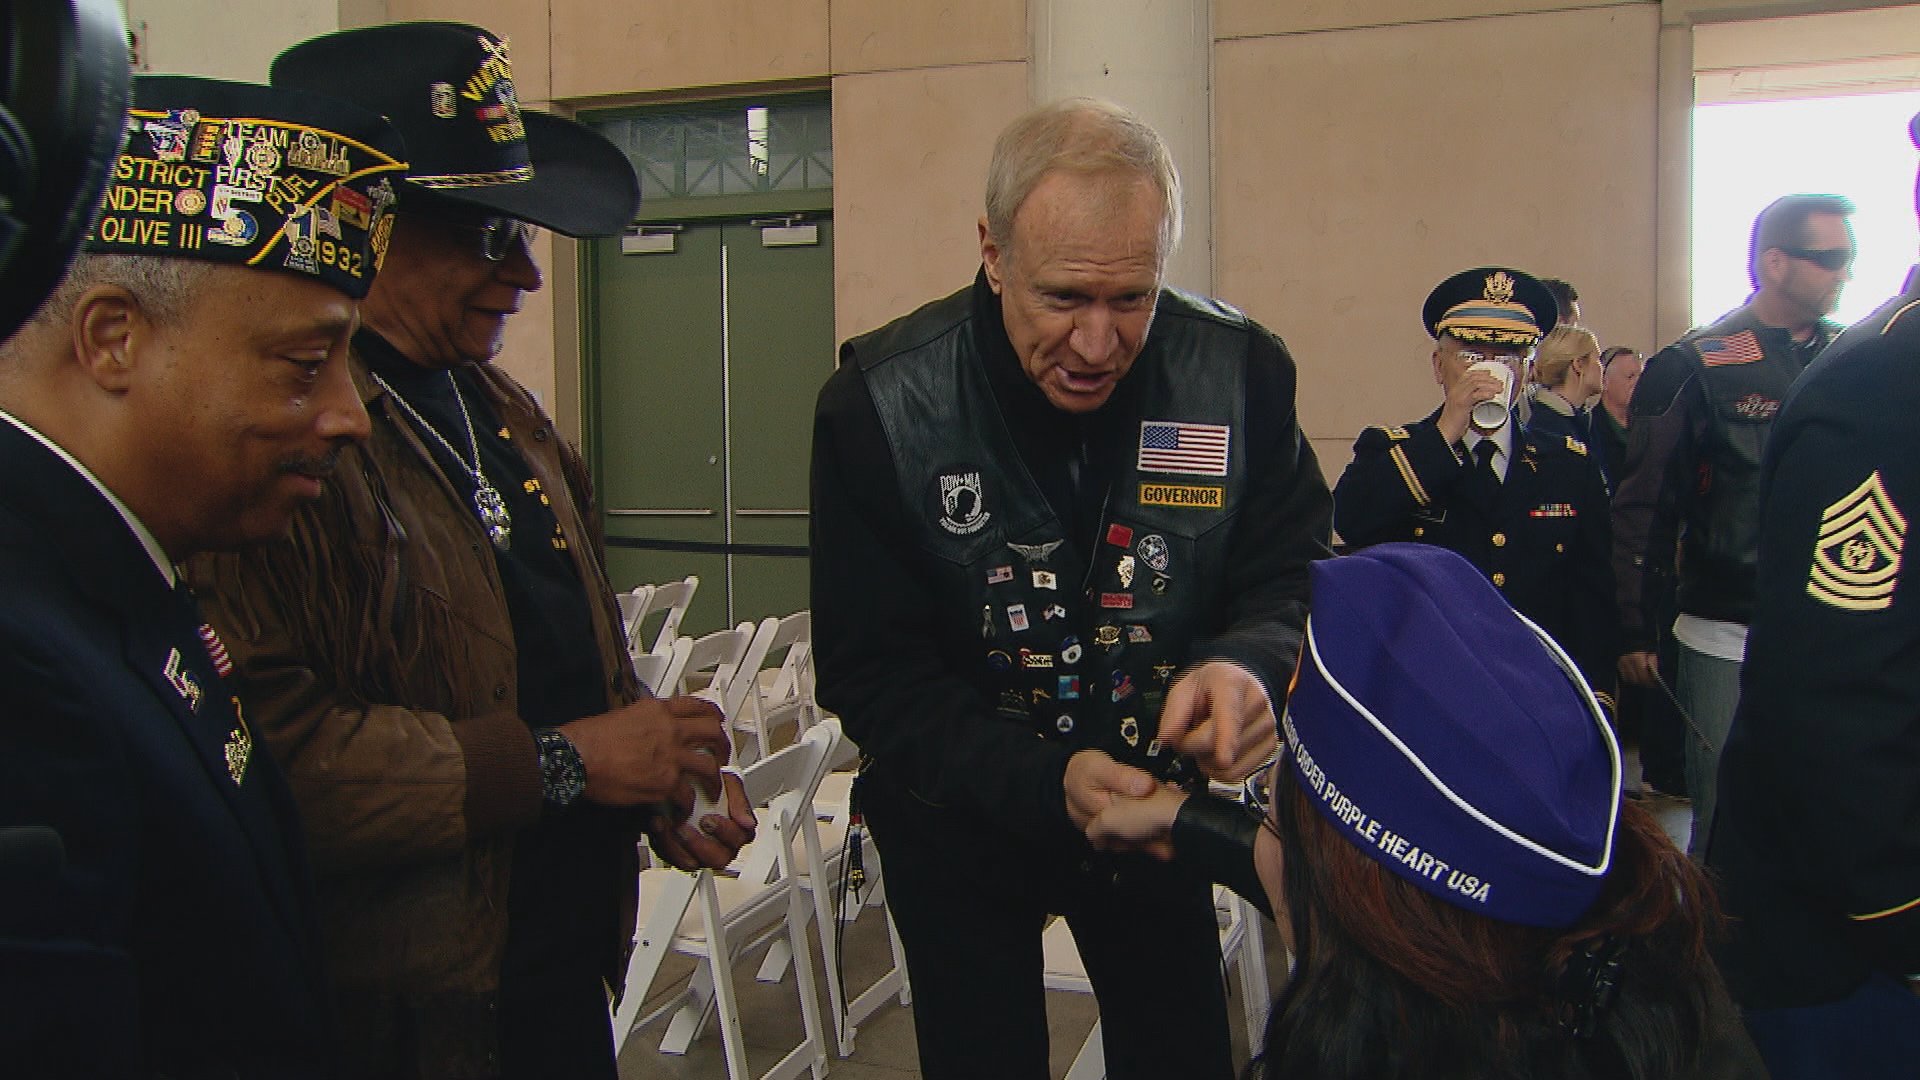 Gov. Bruce Rauner greets a veteran at Wednesday's Veteran's Day ceremony at Soldier Field.